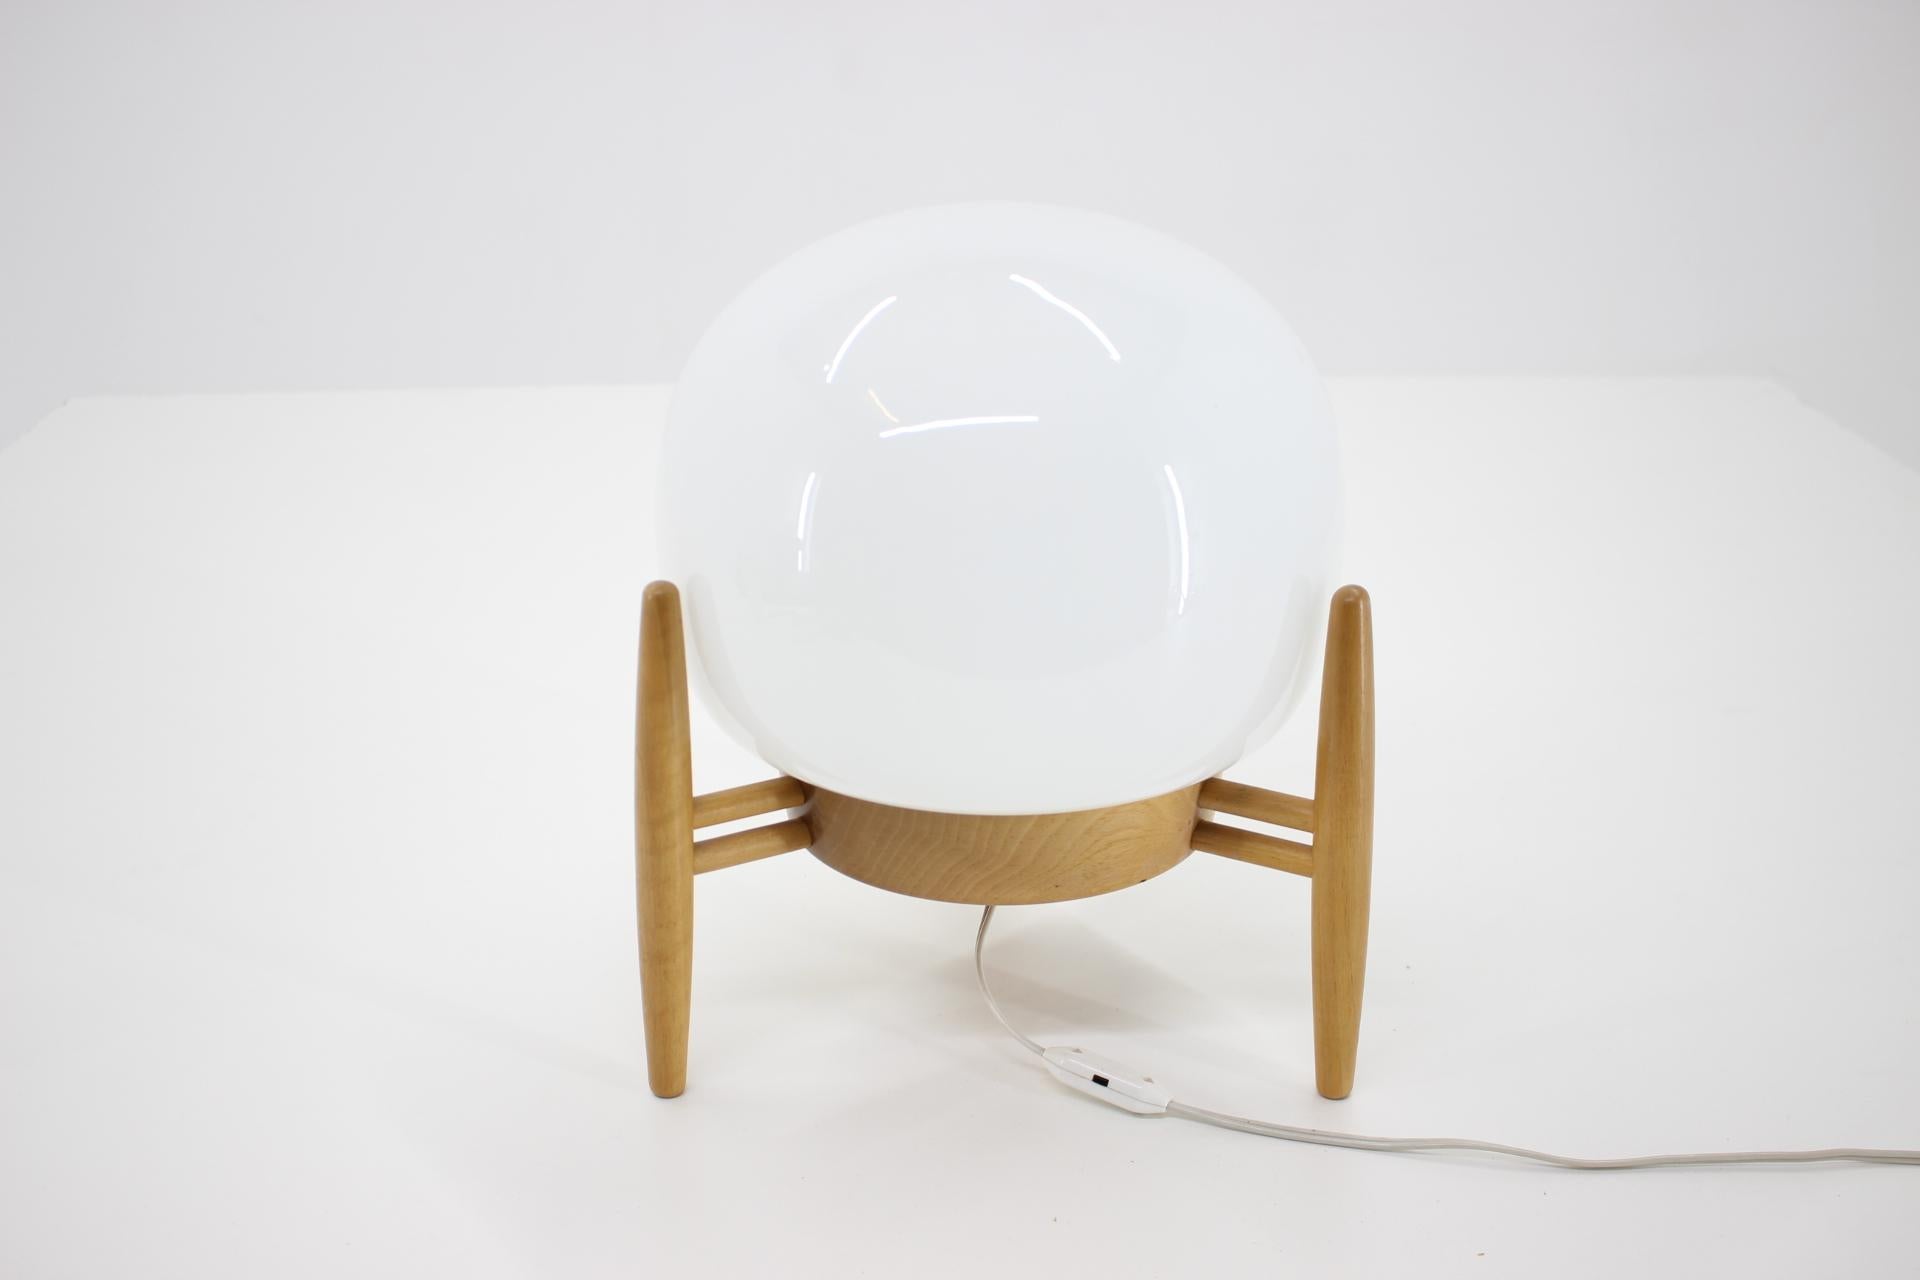 Midcentury Space Age Table Lamp 